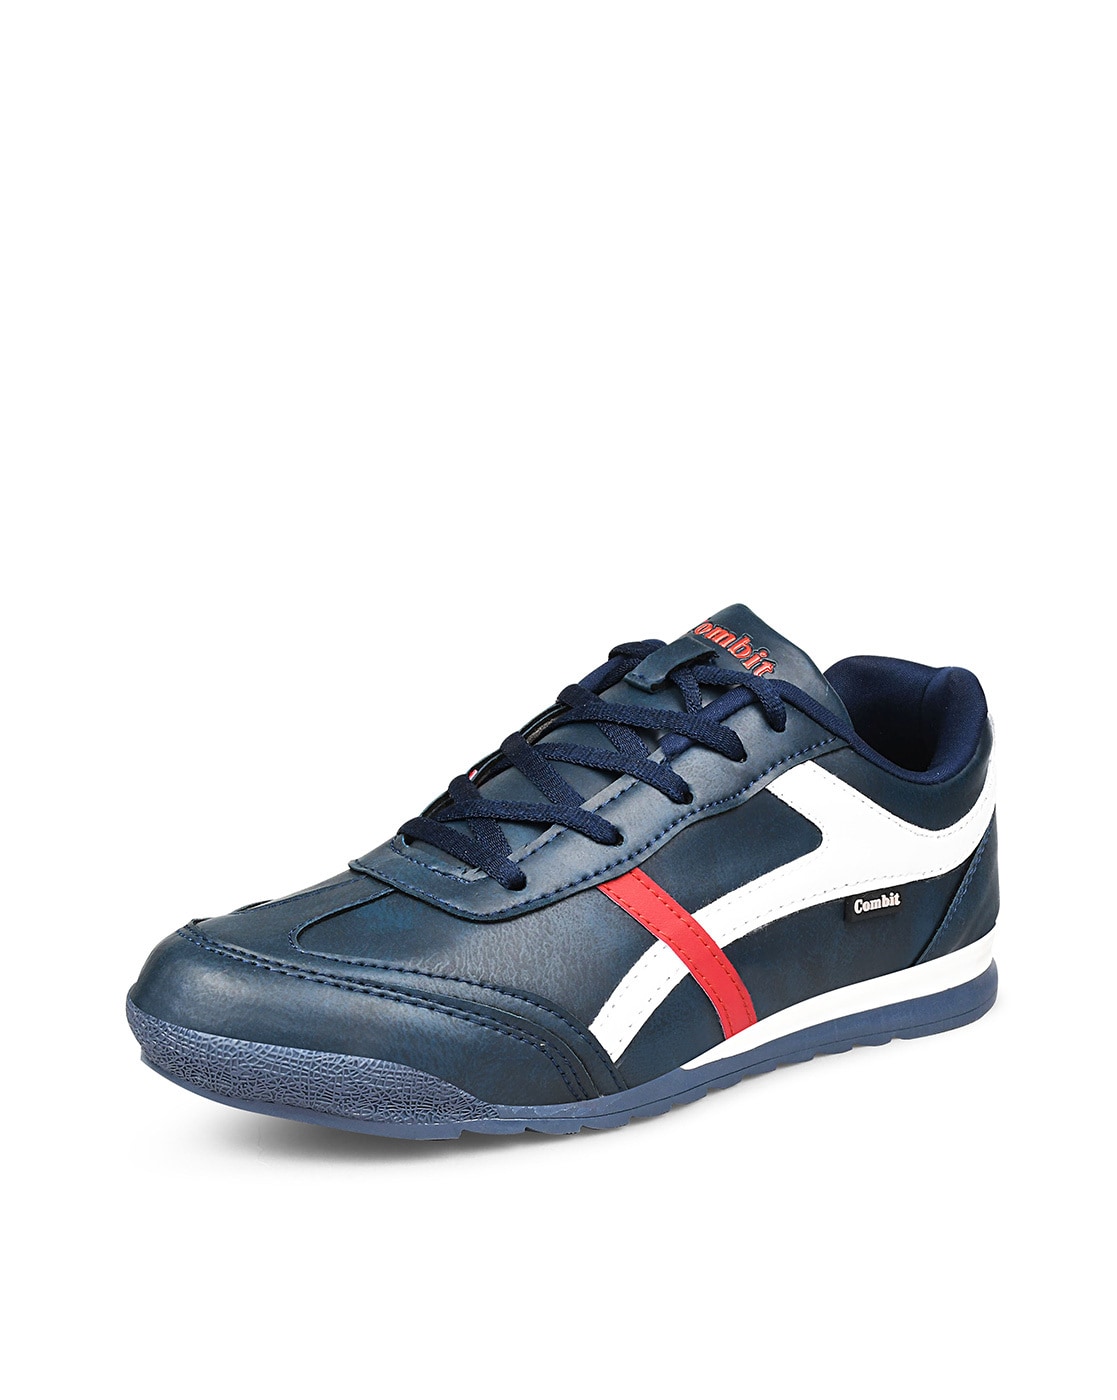 Newfeel Sport Shoes Prices in India- Shopclues- Online Shopping Store-cheohanoi.vn